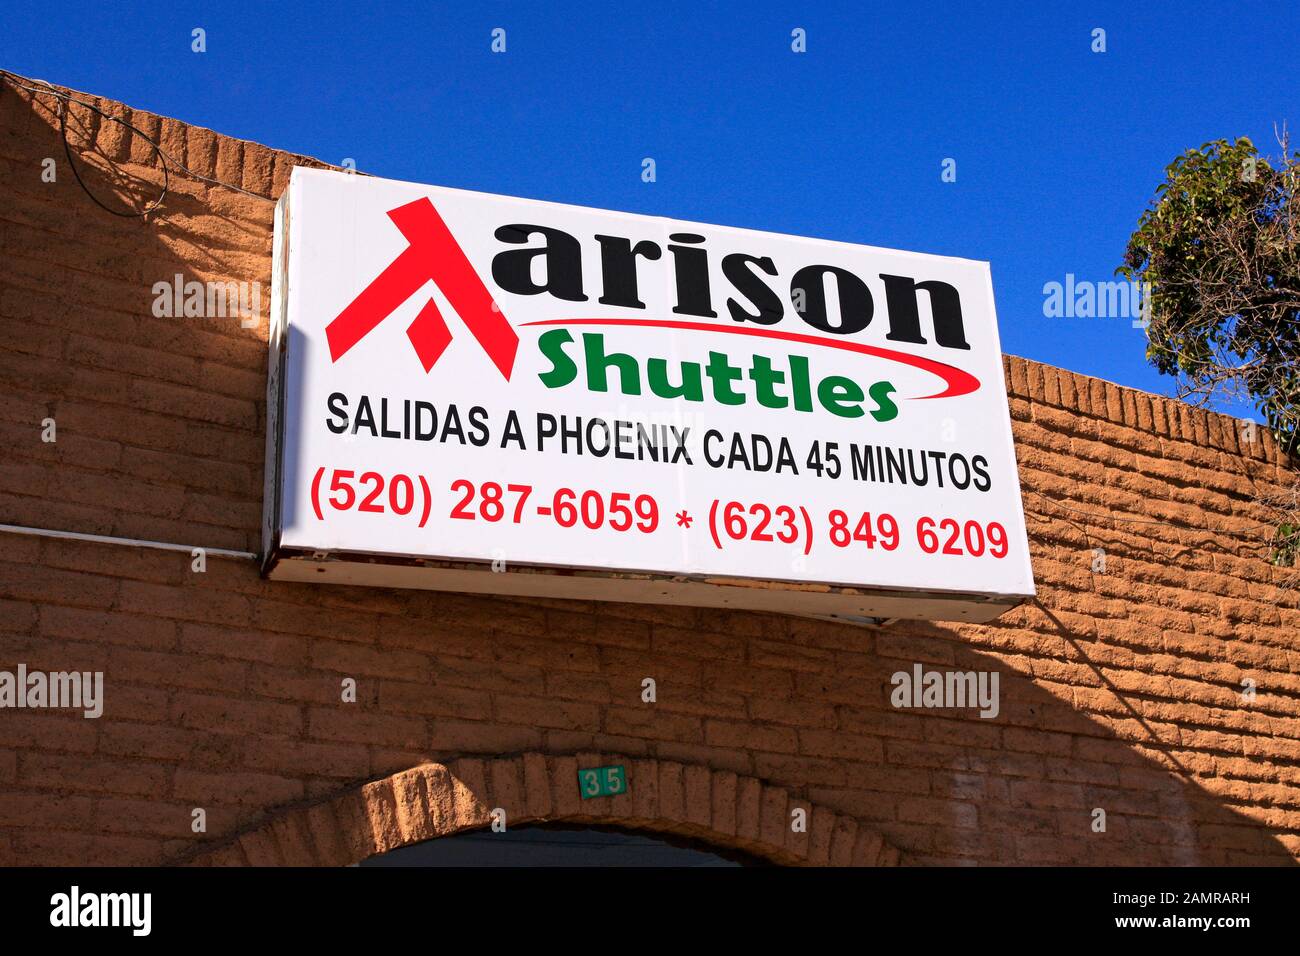 Shuttle bus company sign - regular transportation to Phoenix for mexicans from the border city of Nogales AZ Stock Photo